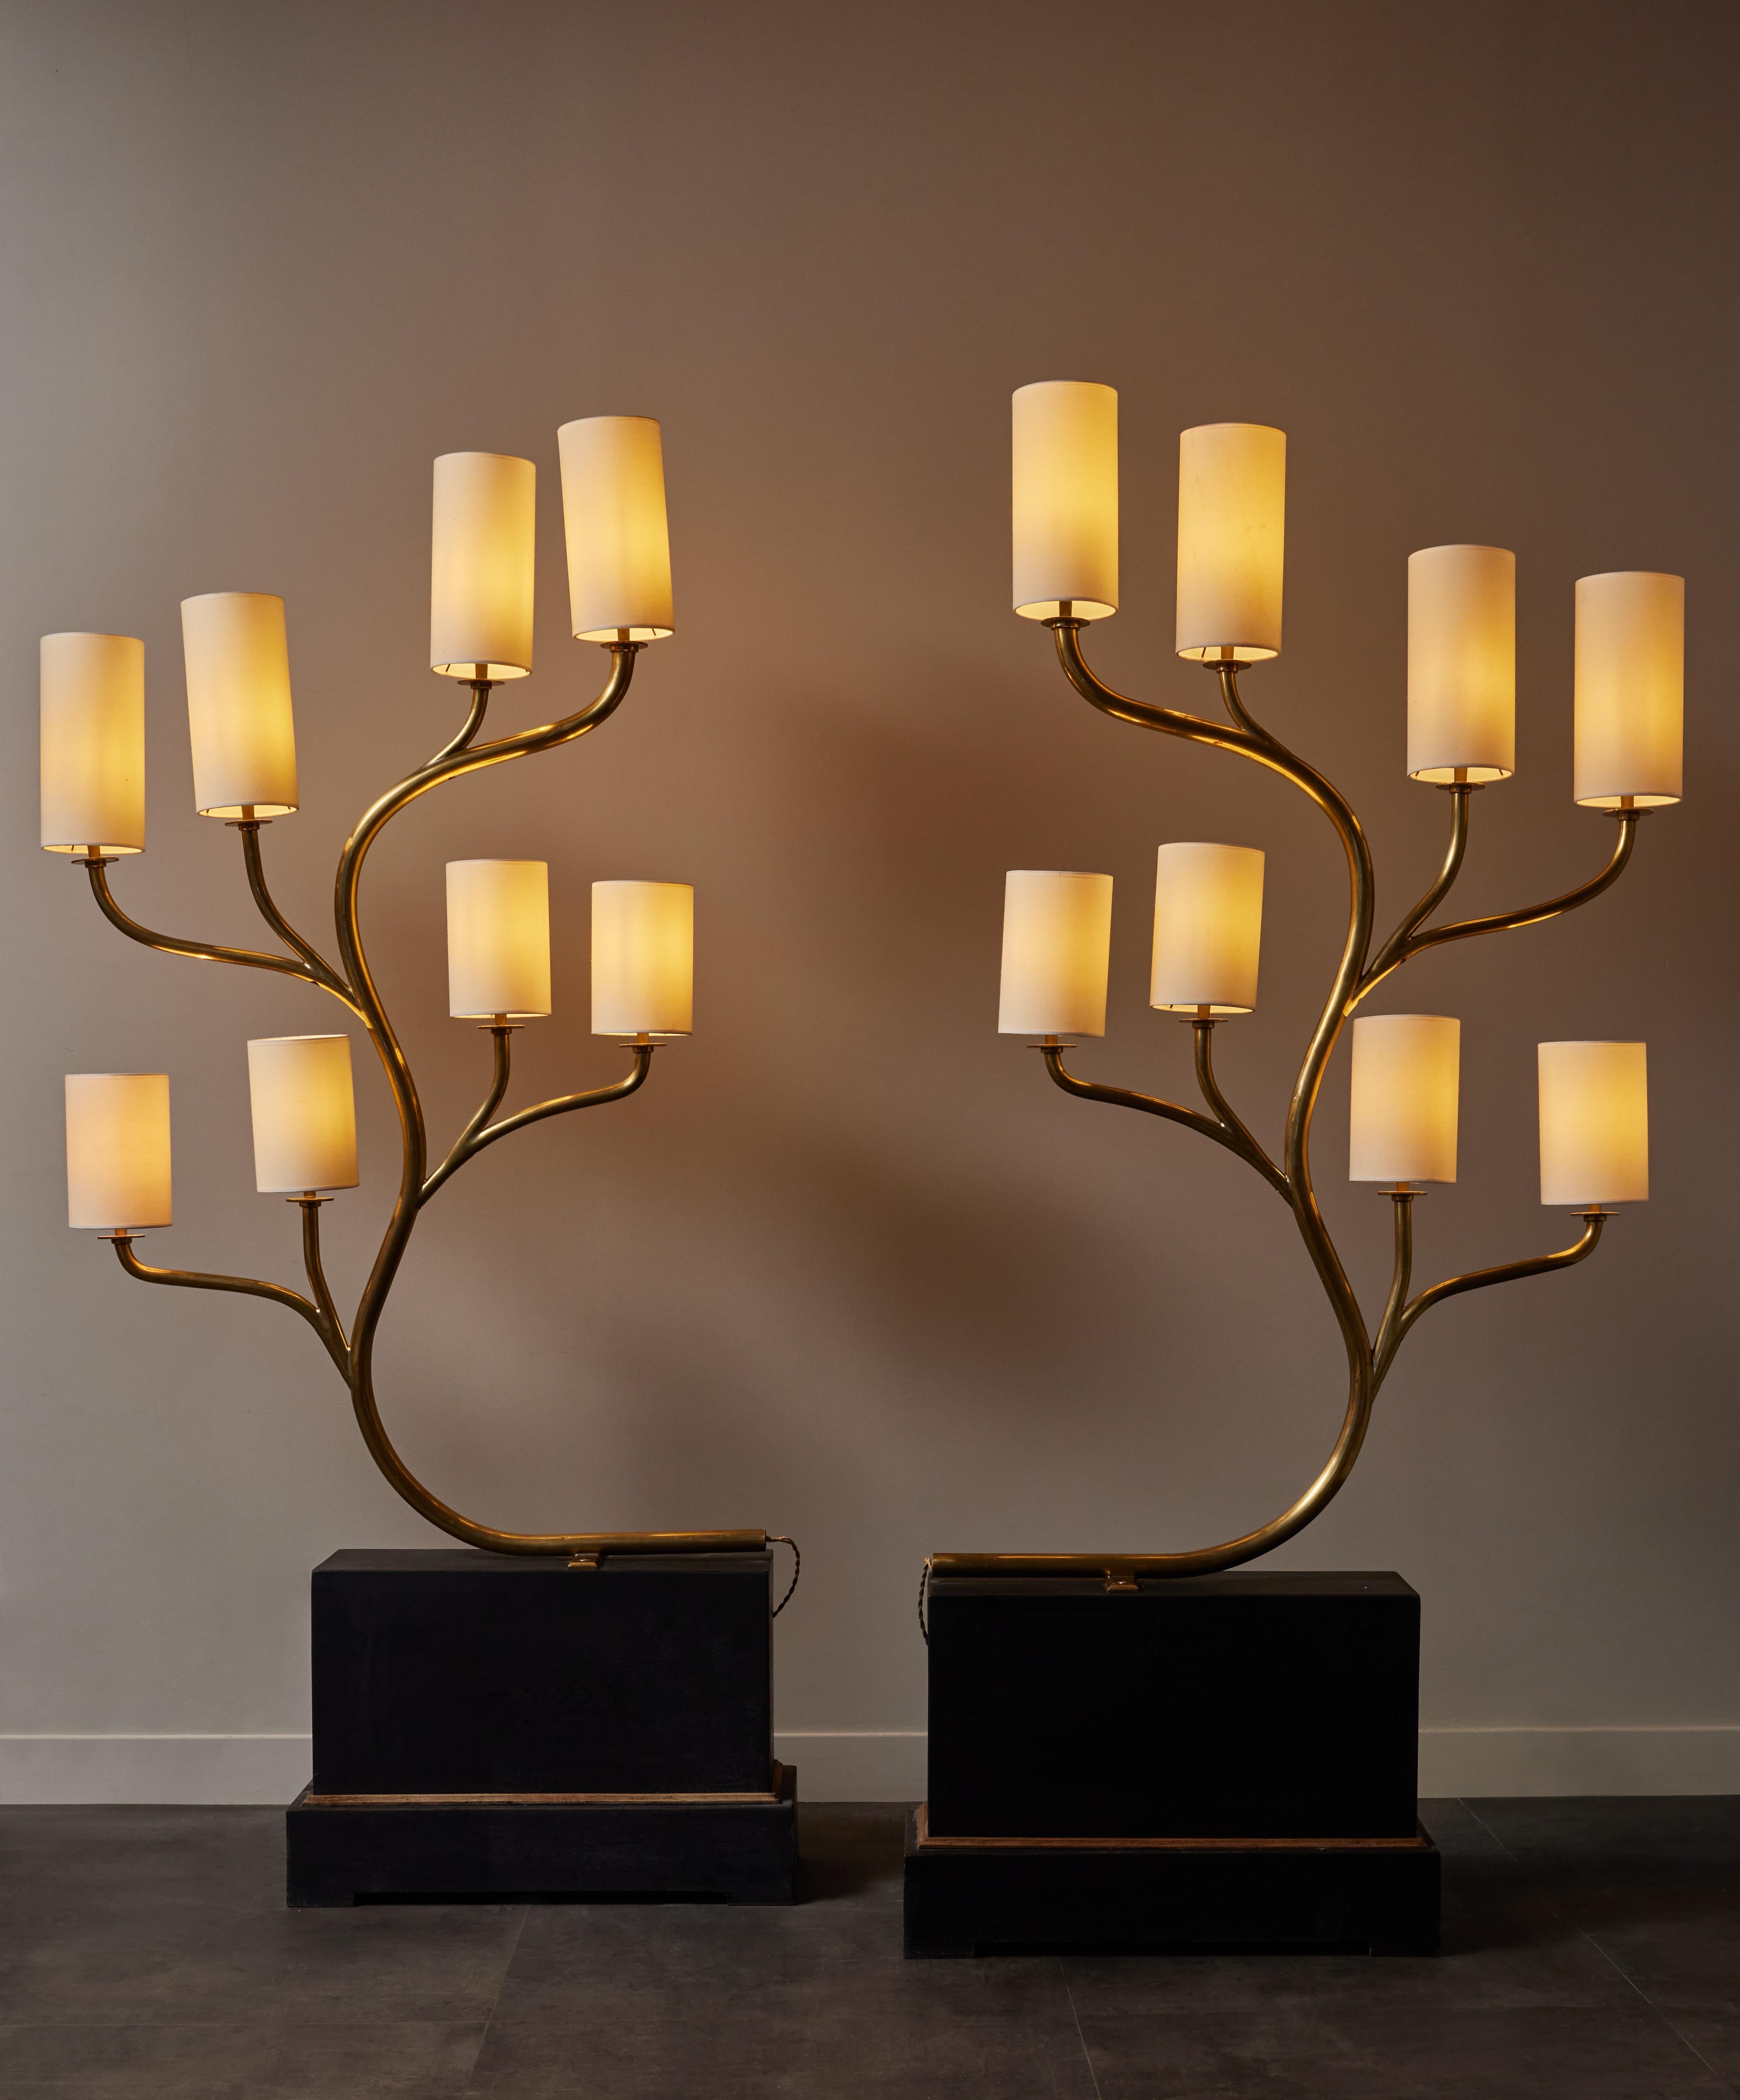 Pair of impressive floor lamps, ideal against a wall or as room dividers.

Rectangular wood base, on which is attached a brass tree with eight arms of lights, each topped with a coton shade.